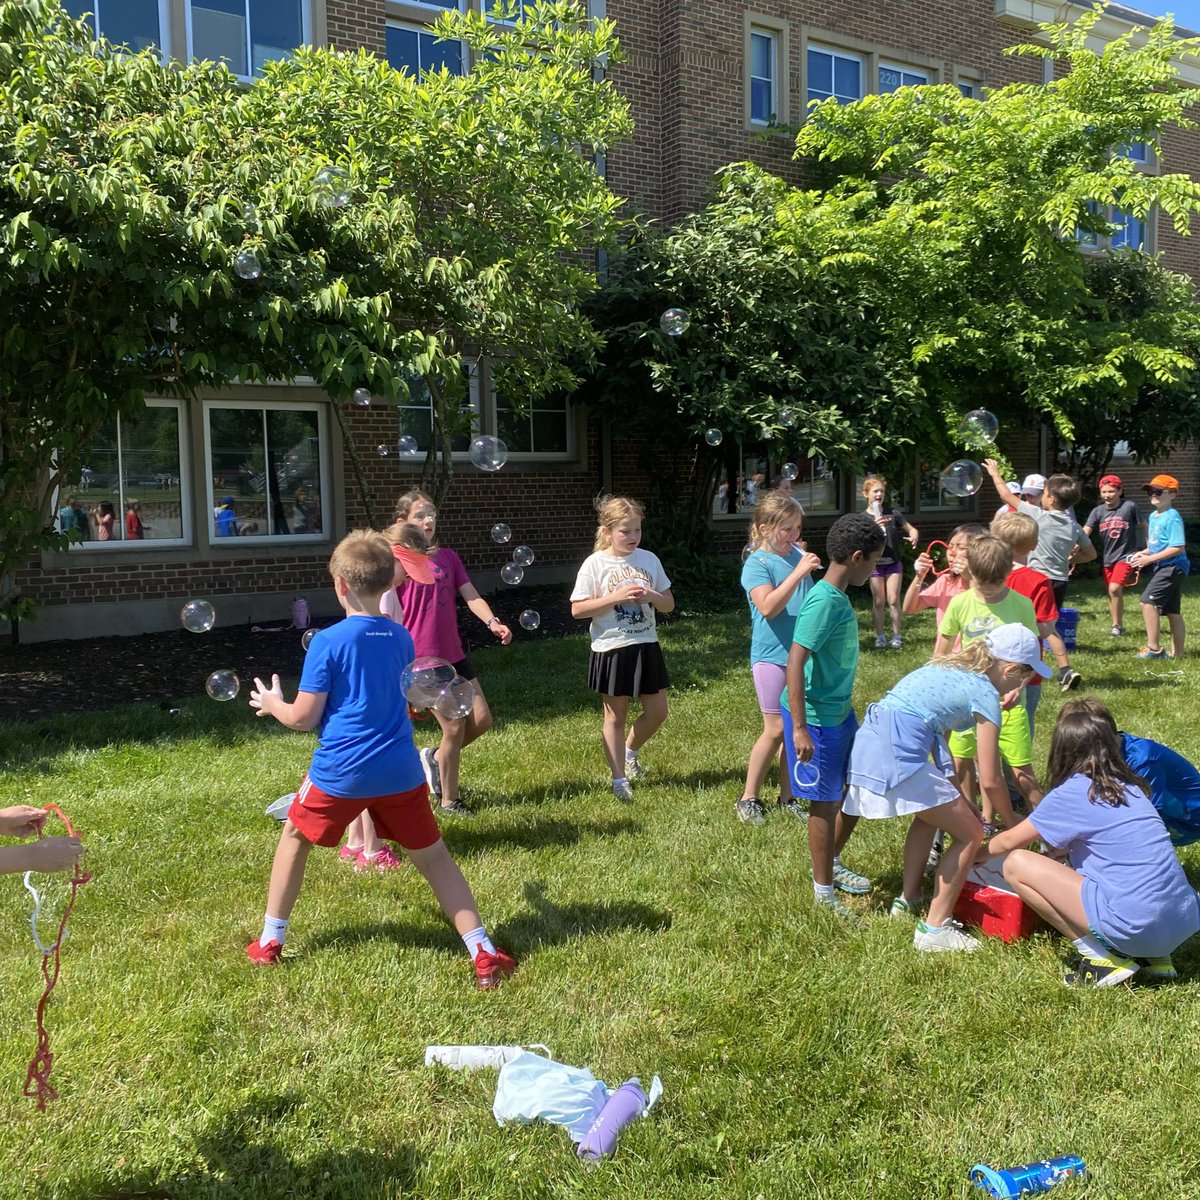 Kickball and playground play and now onto bubbles and popsicles to cool off! #IHPromise #BeBrave @IHElementary @IHSchools